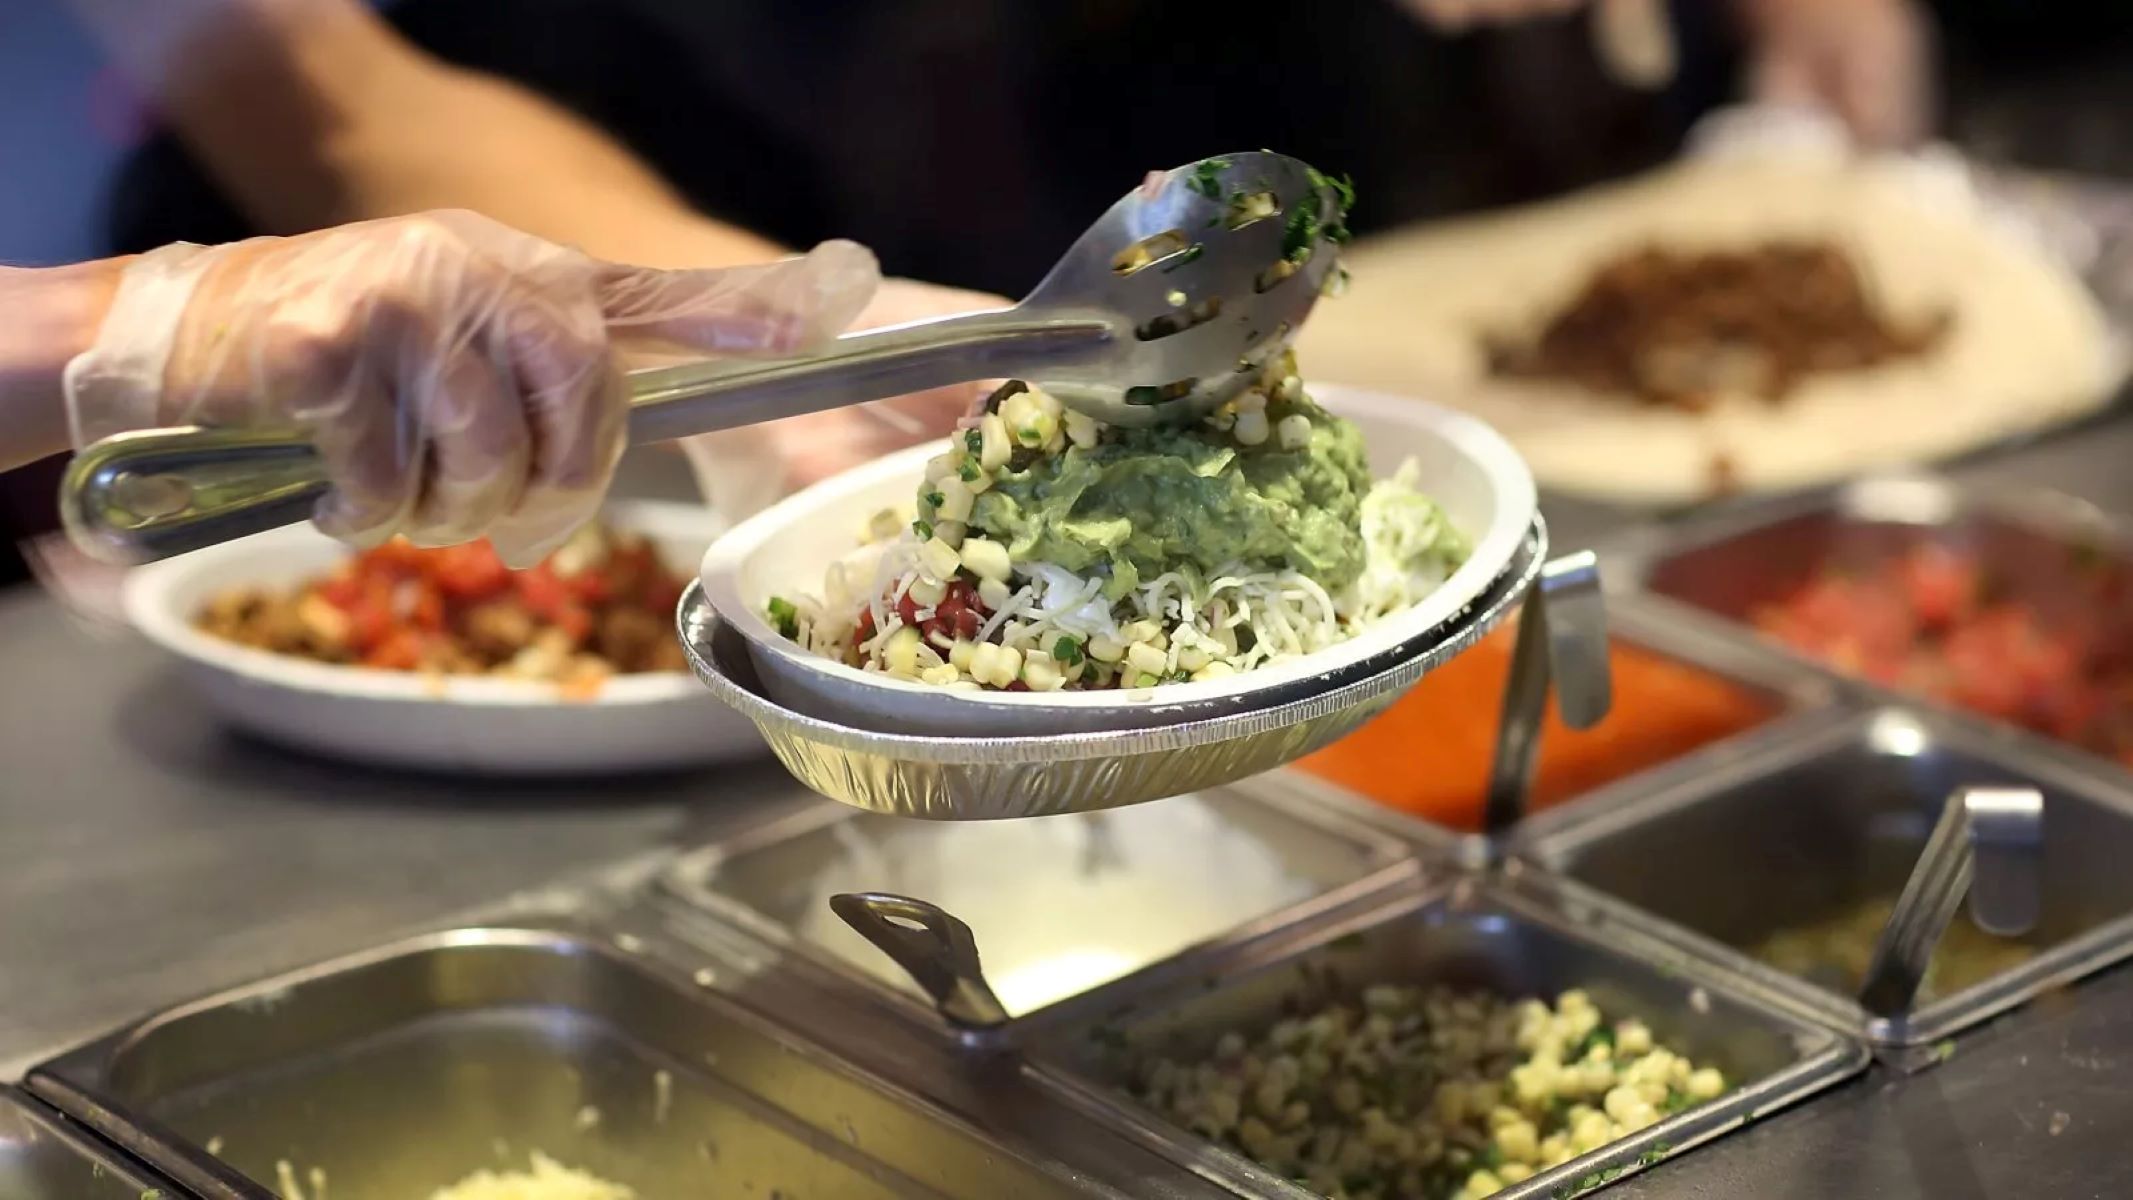 Shocking: Angry Chipotle Customer Throws Burrito Bowl At Employee In Heated Video